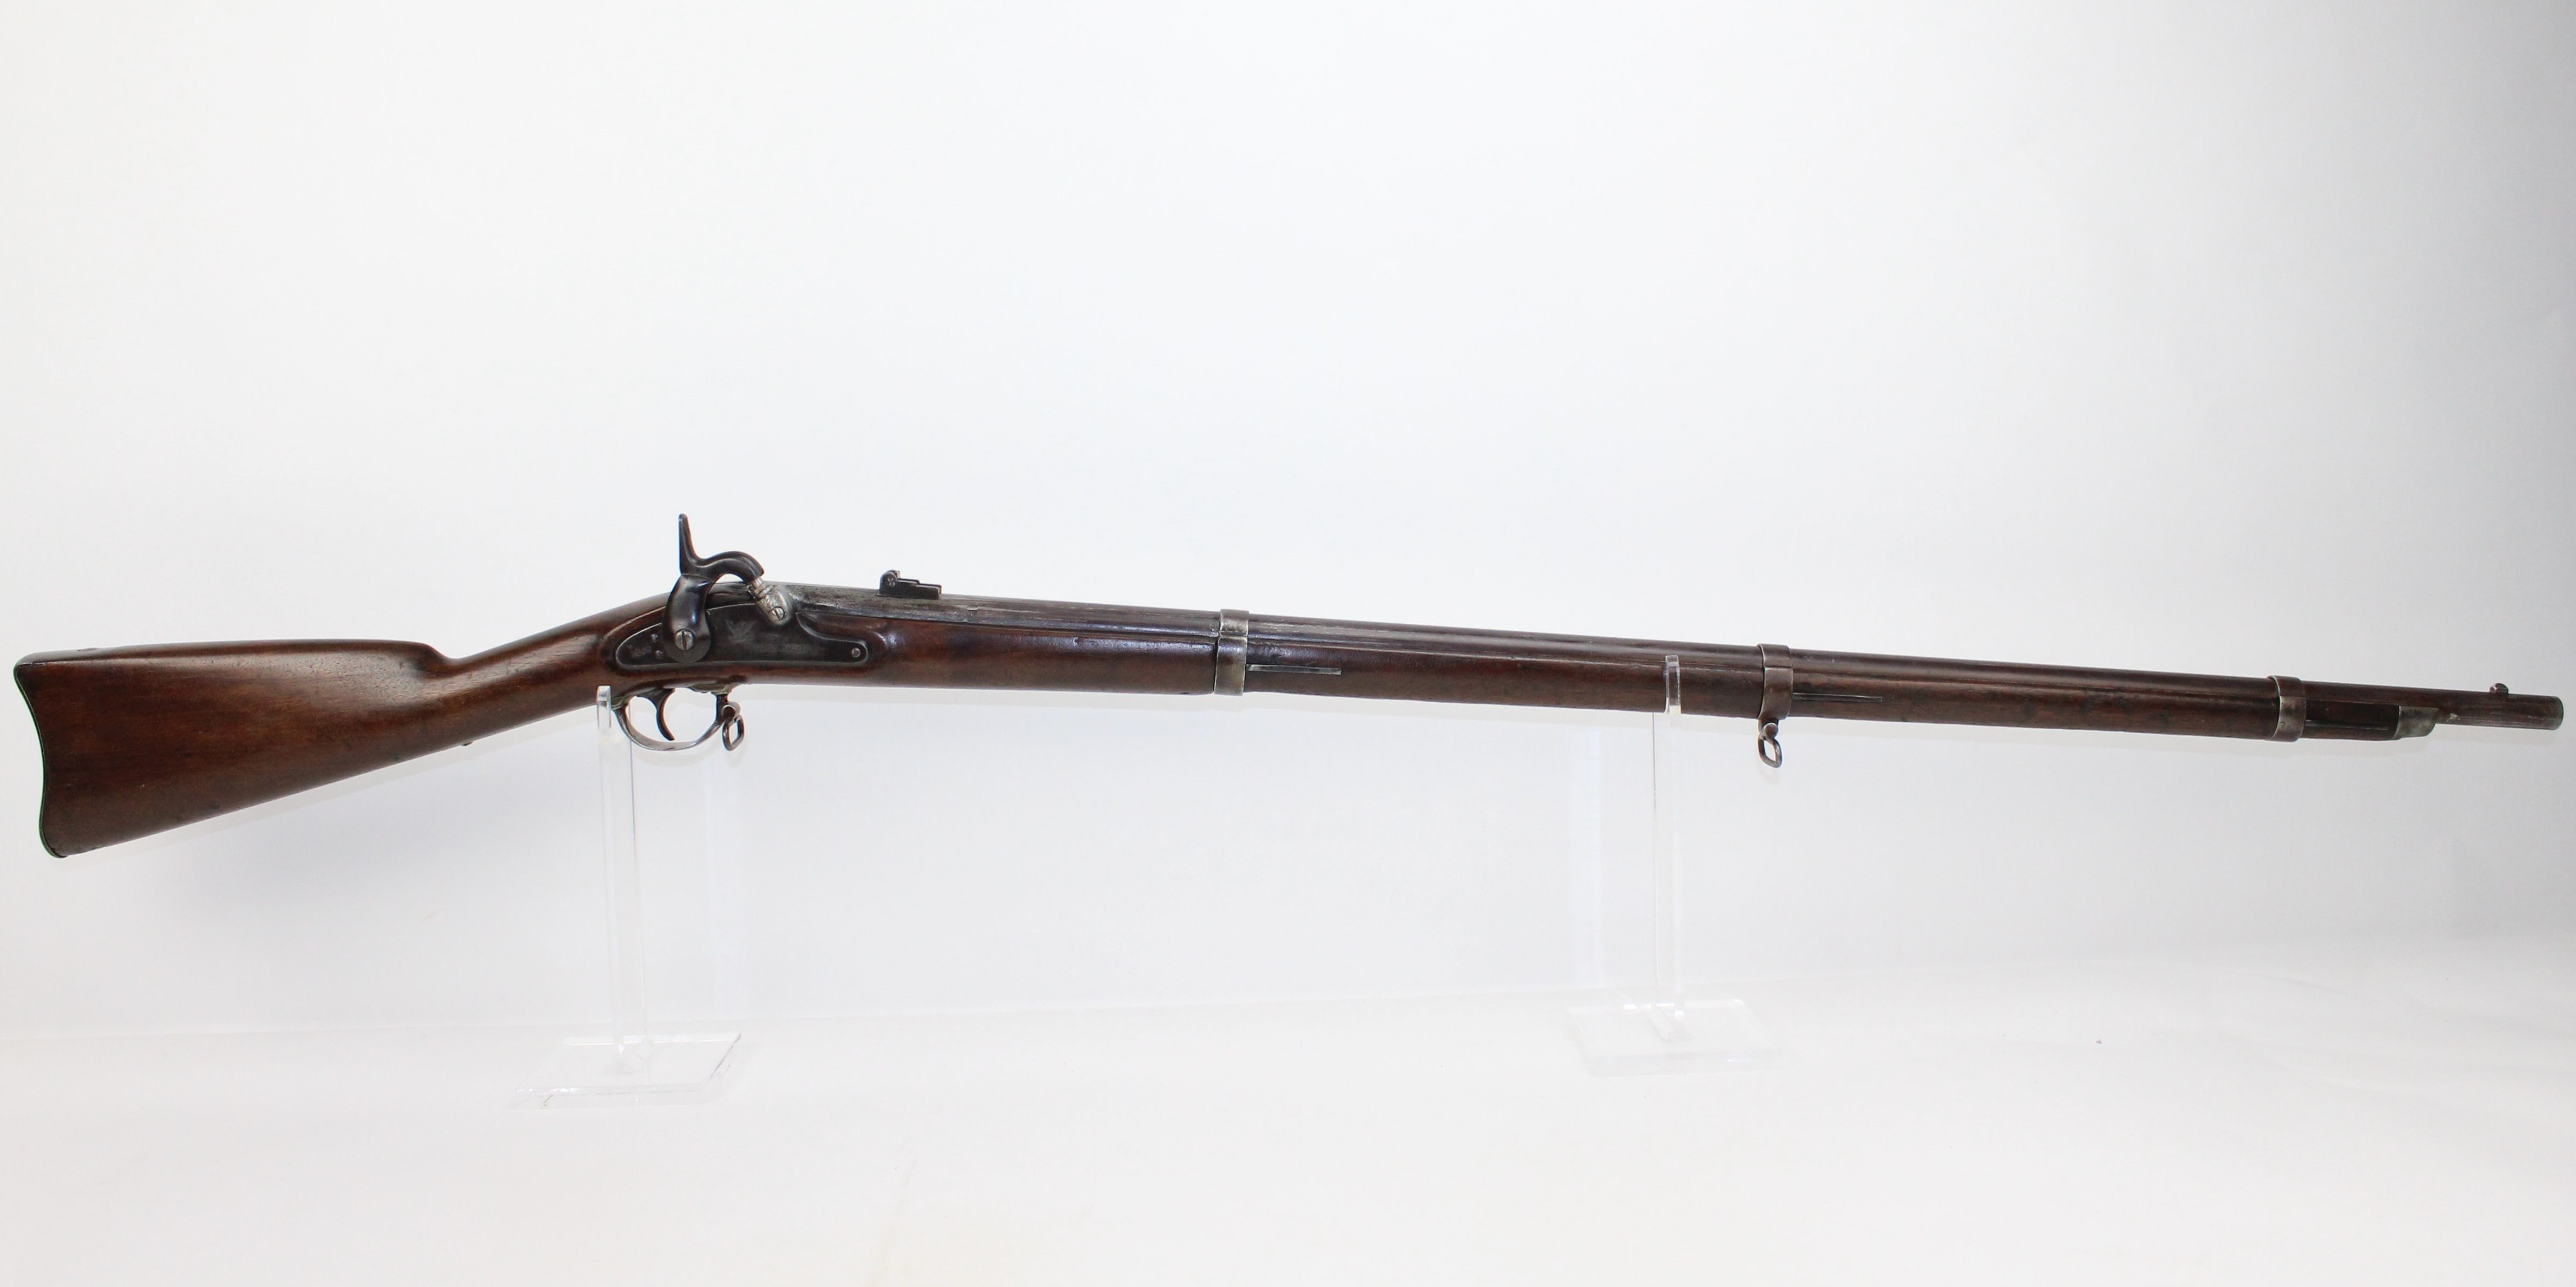 U S Springfield Model 1861 Percussion Rifle Musket Candr Antique002